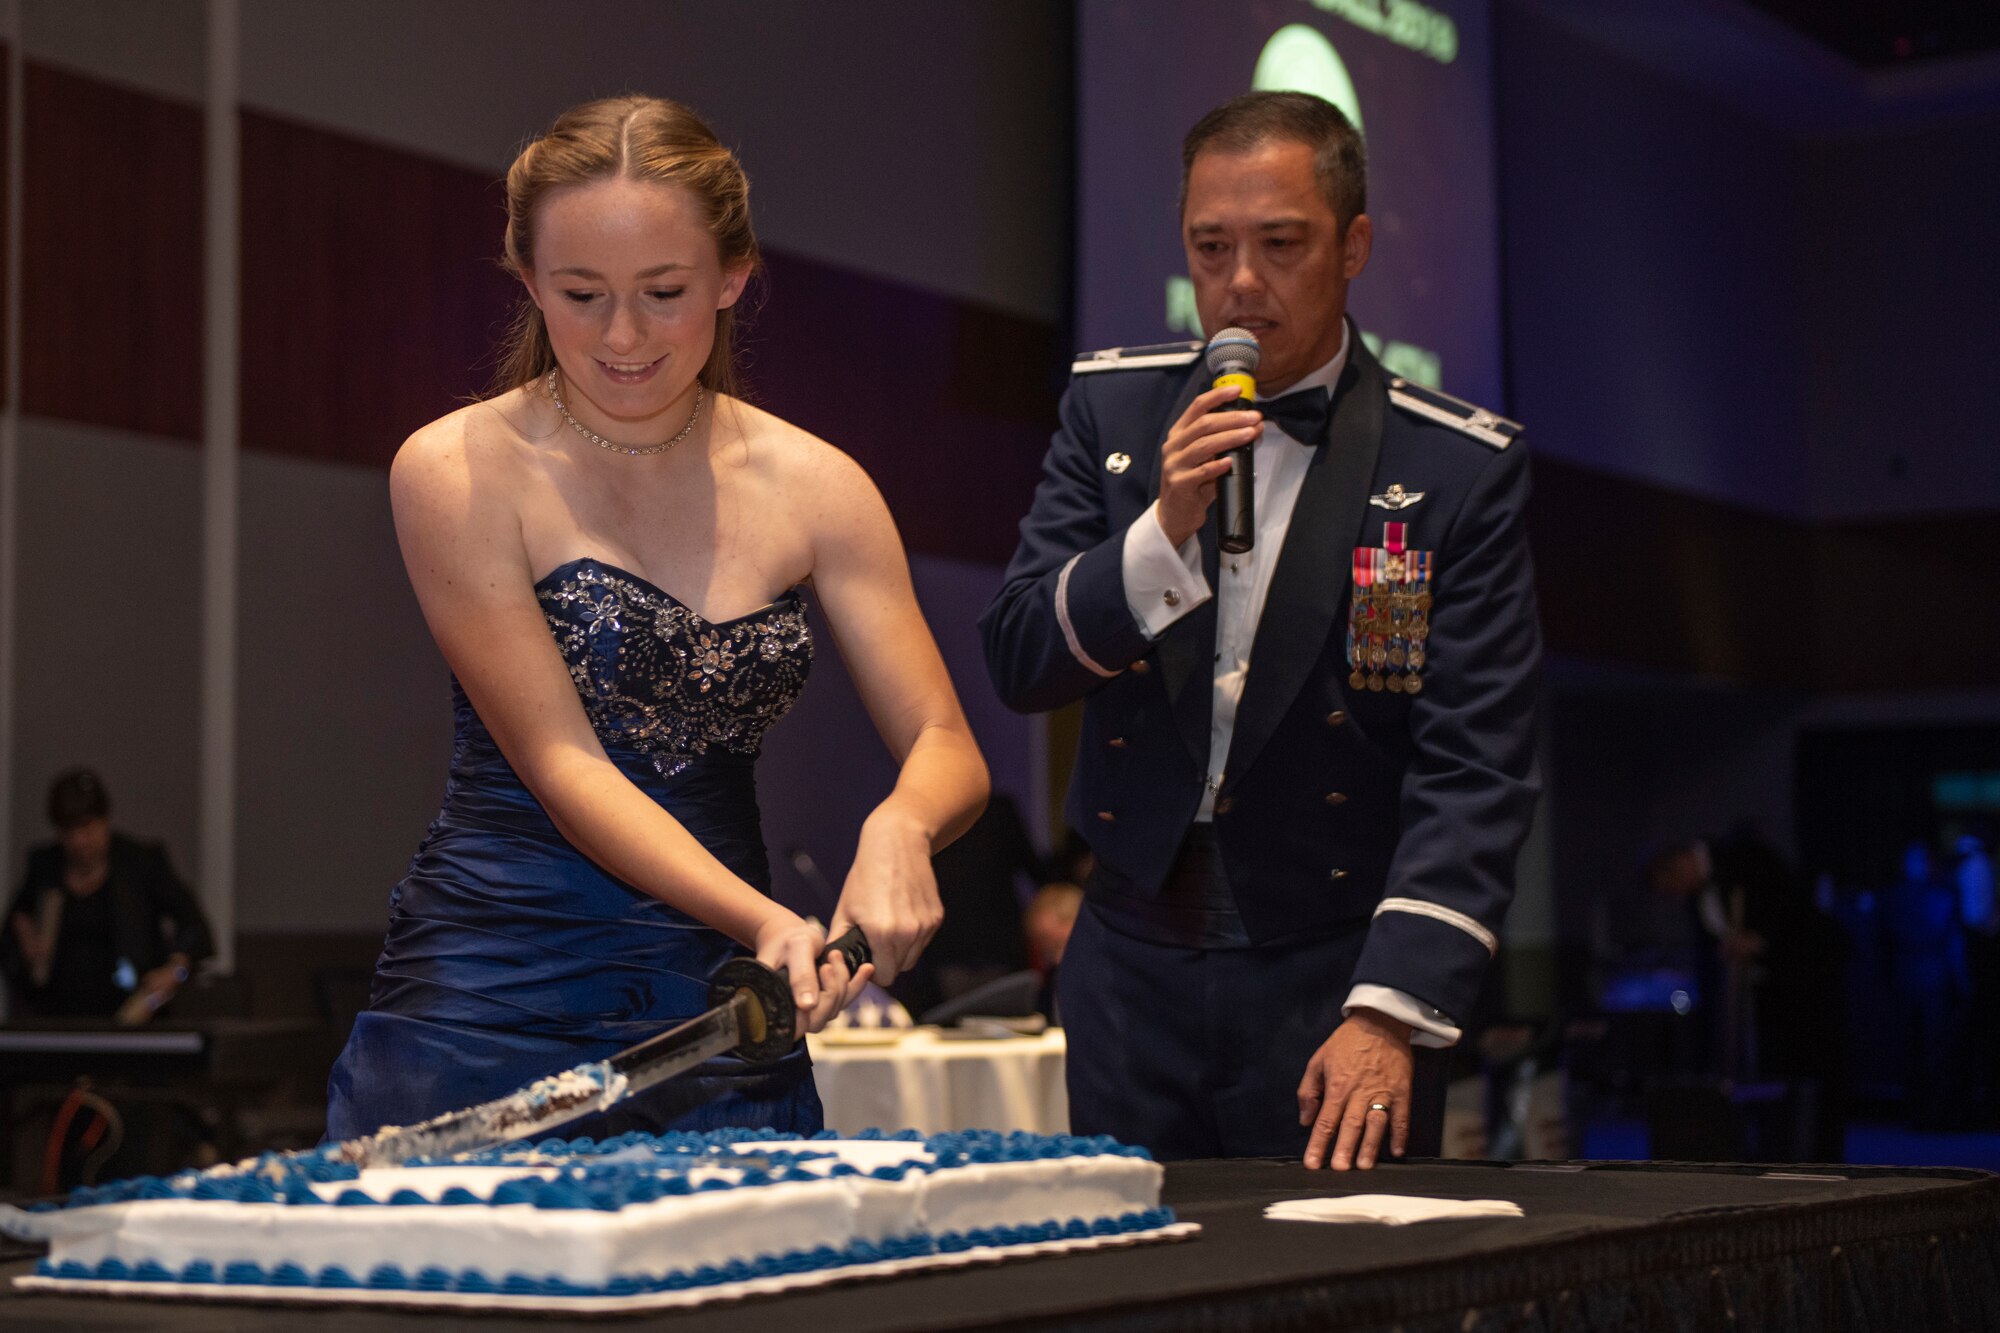 Airman cuts the first slice of cake during the Air Force Ball